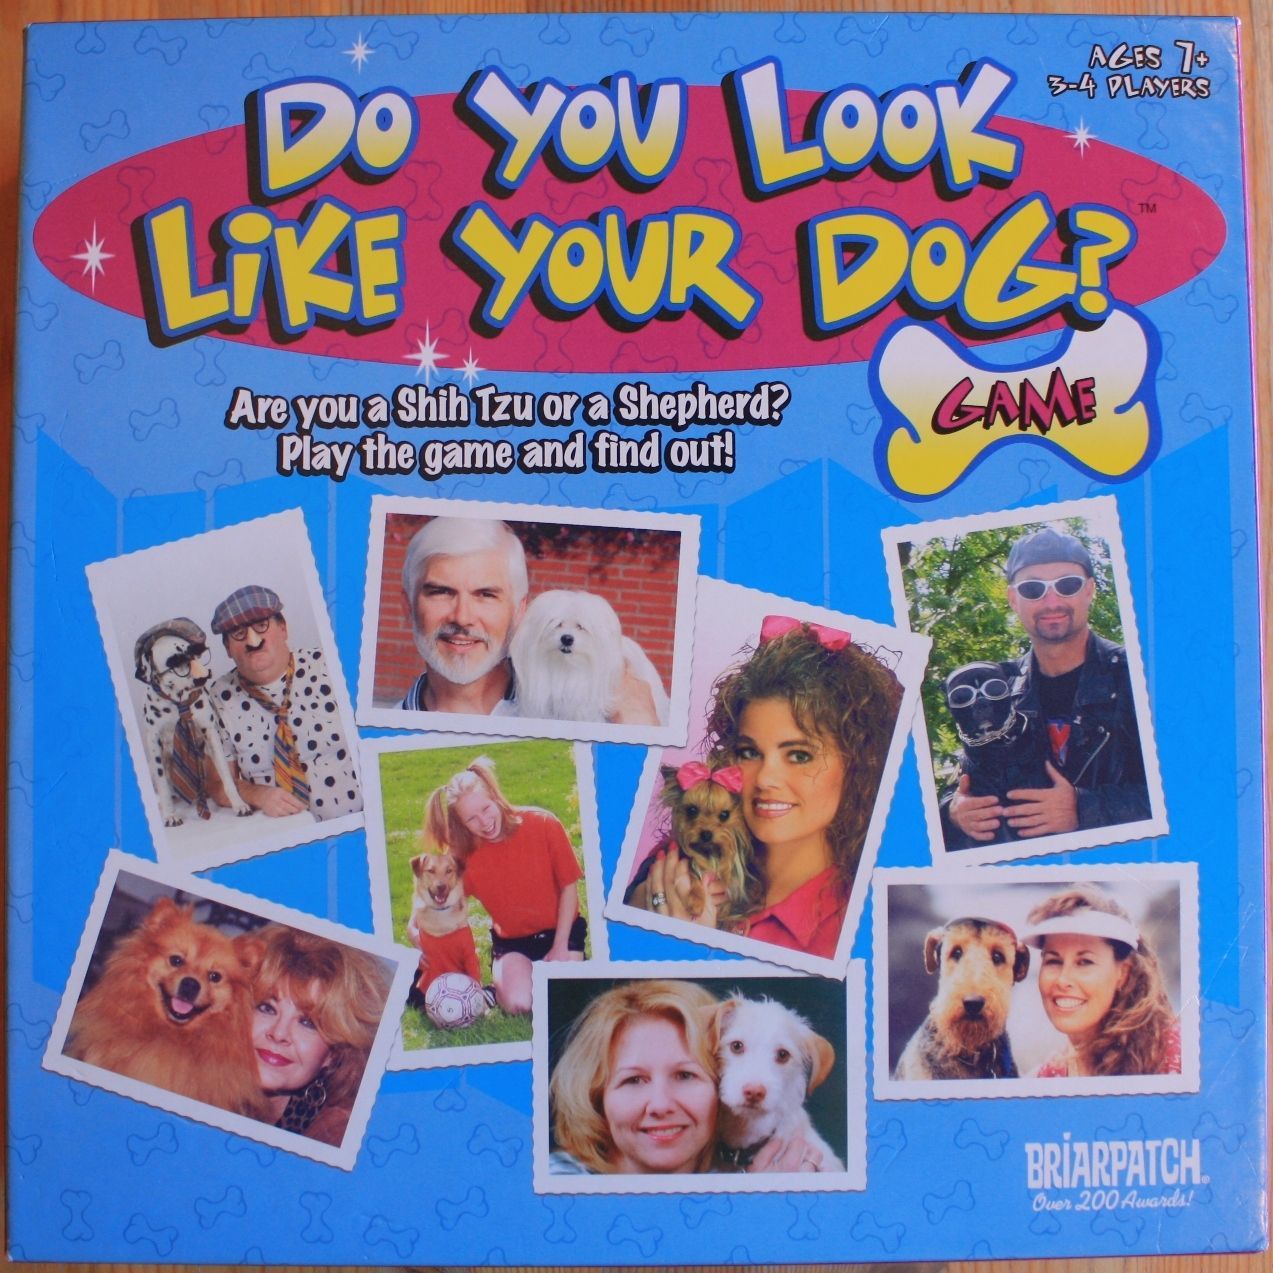 Do you look like your dog?